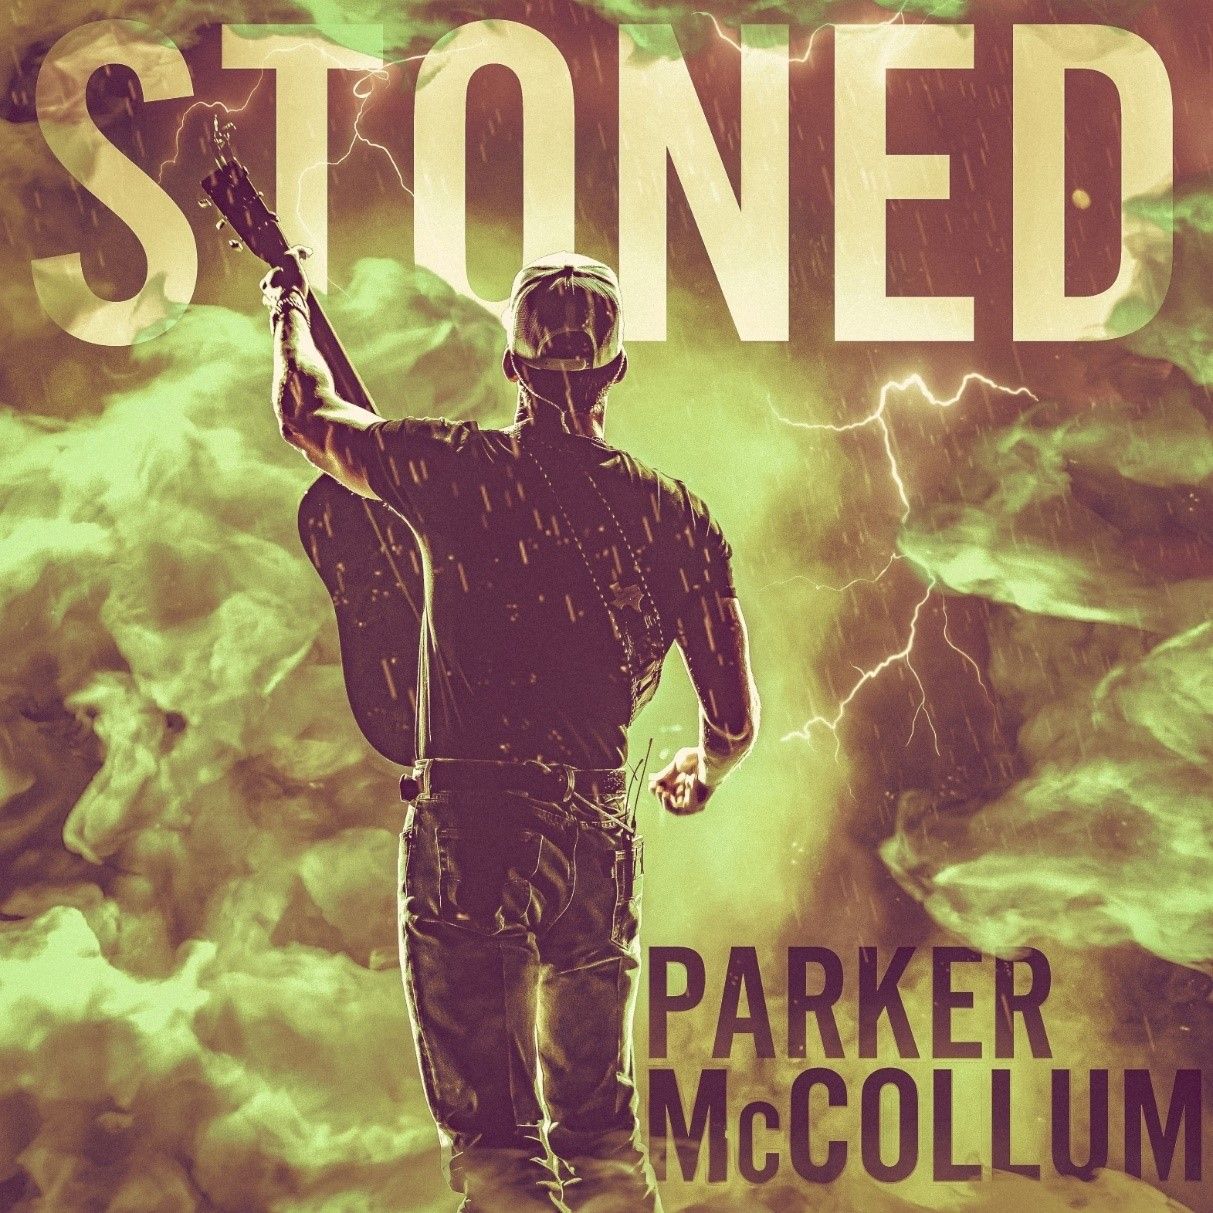 Parker McCollum Scores Highest Streaming Debut with New Track “Stoned” With 2.4 Million On-Demand Streams 